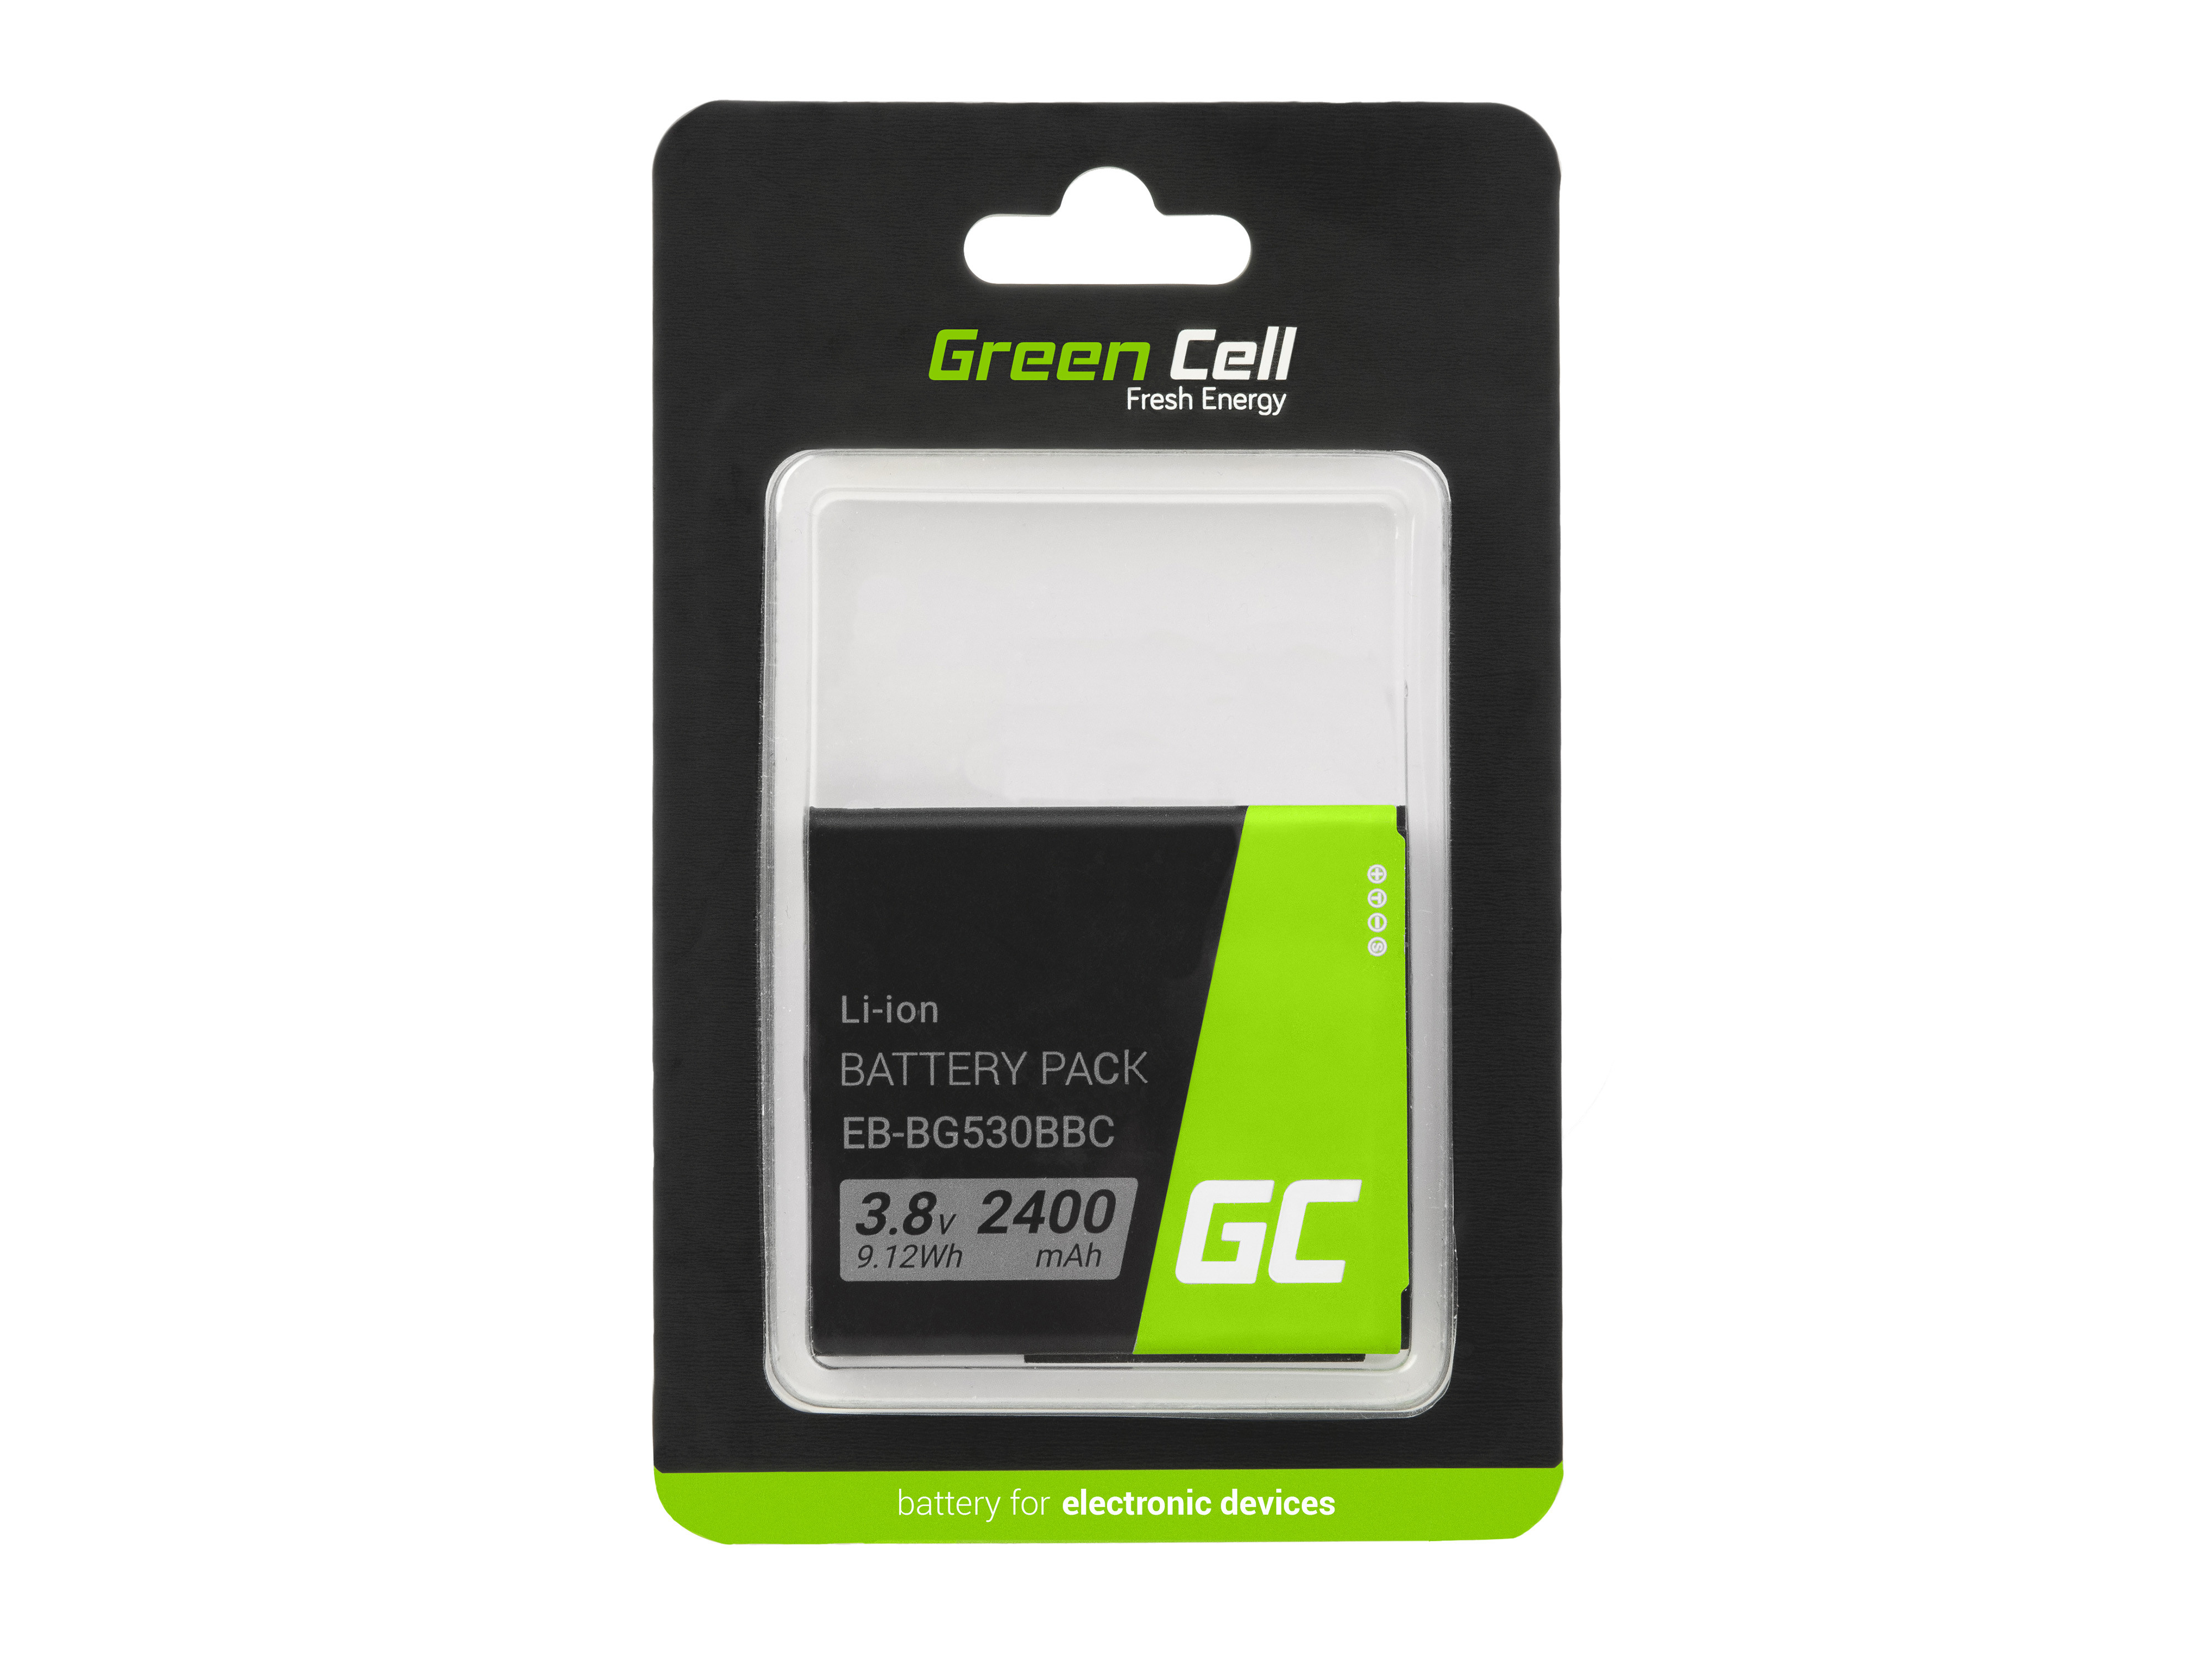 Baterie Green Cell Samsung Galaxy Grand Prime SM-G531F, Samsung Galaxy J5, Samsung Galaxy J3 2400mAh Li-ion